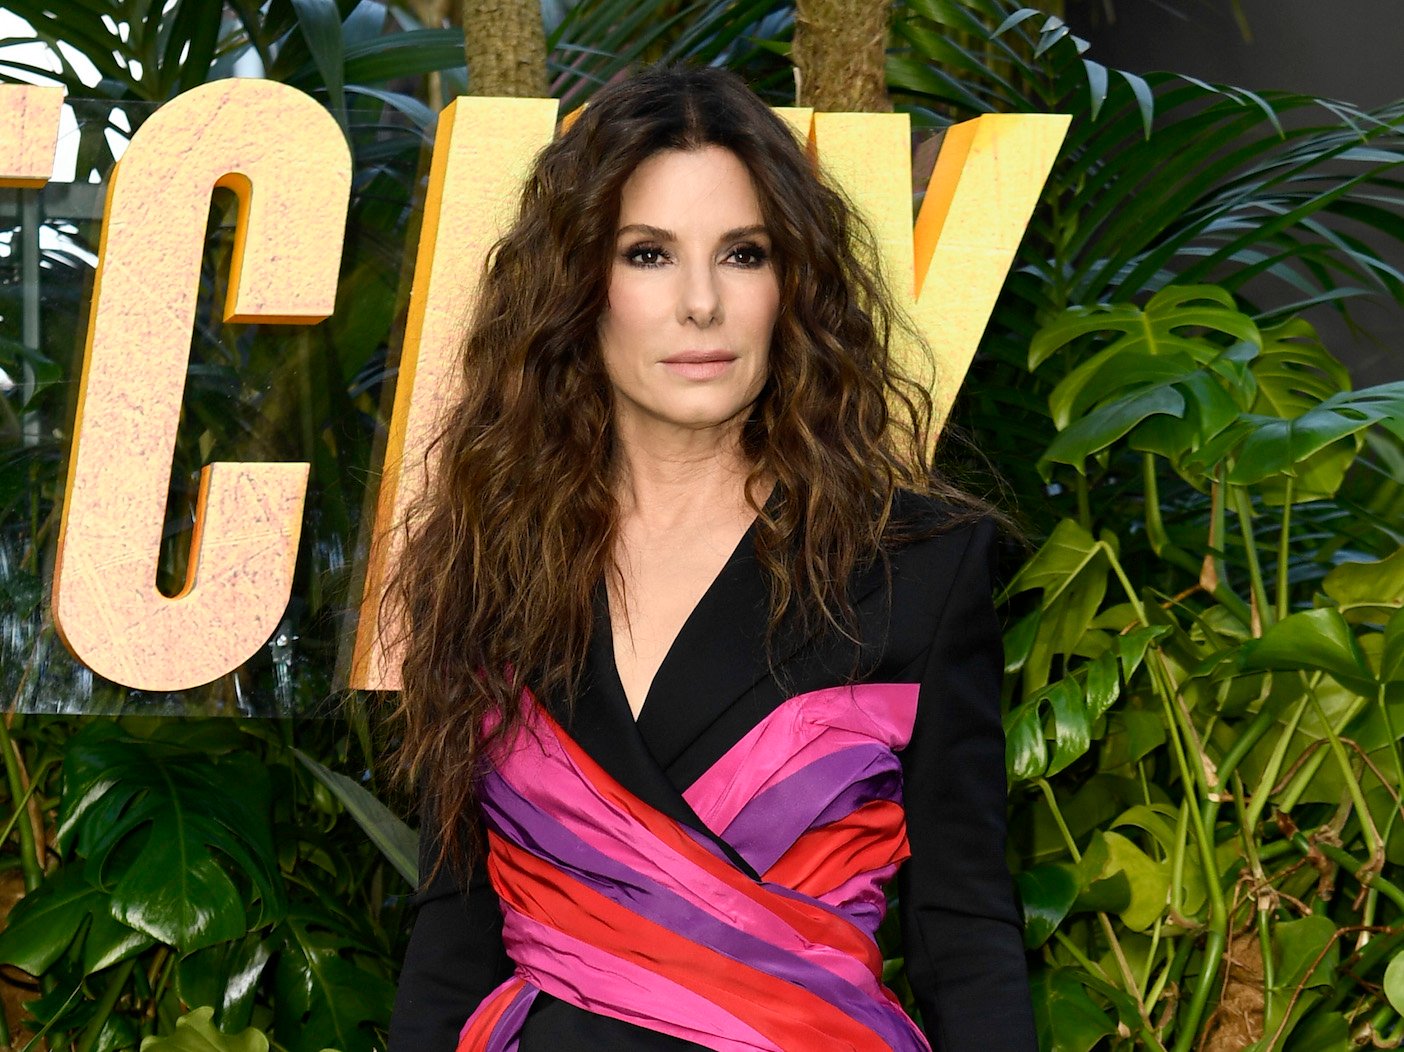 Sketchy Source Claims Sandra Bullock Supposedly Living Separate Life From Partner